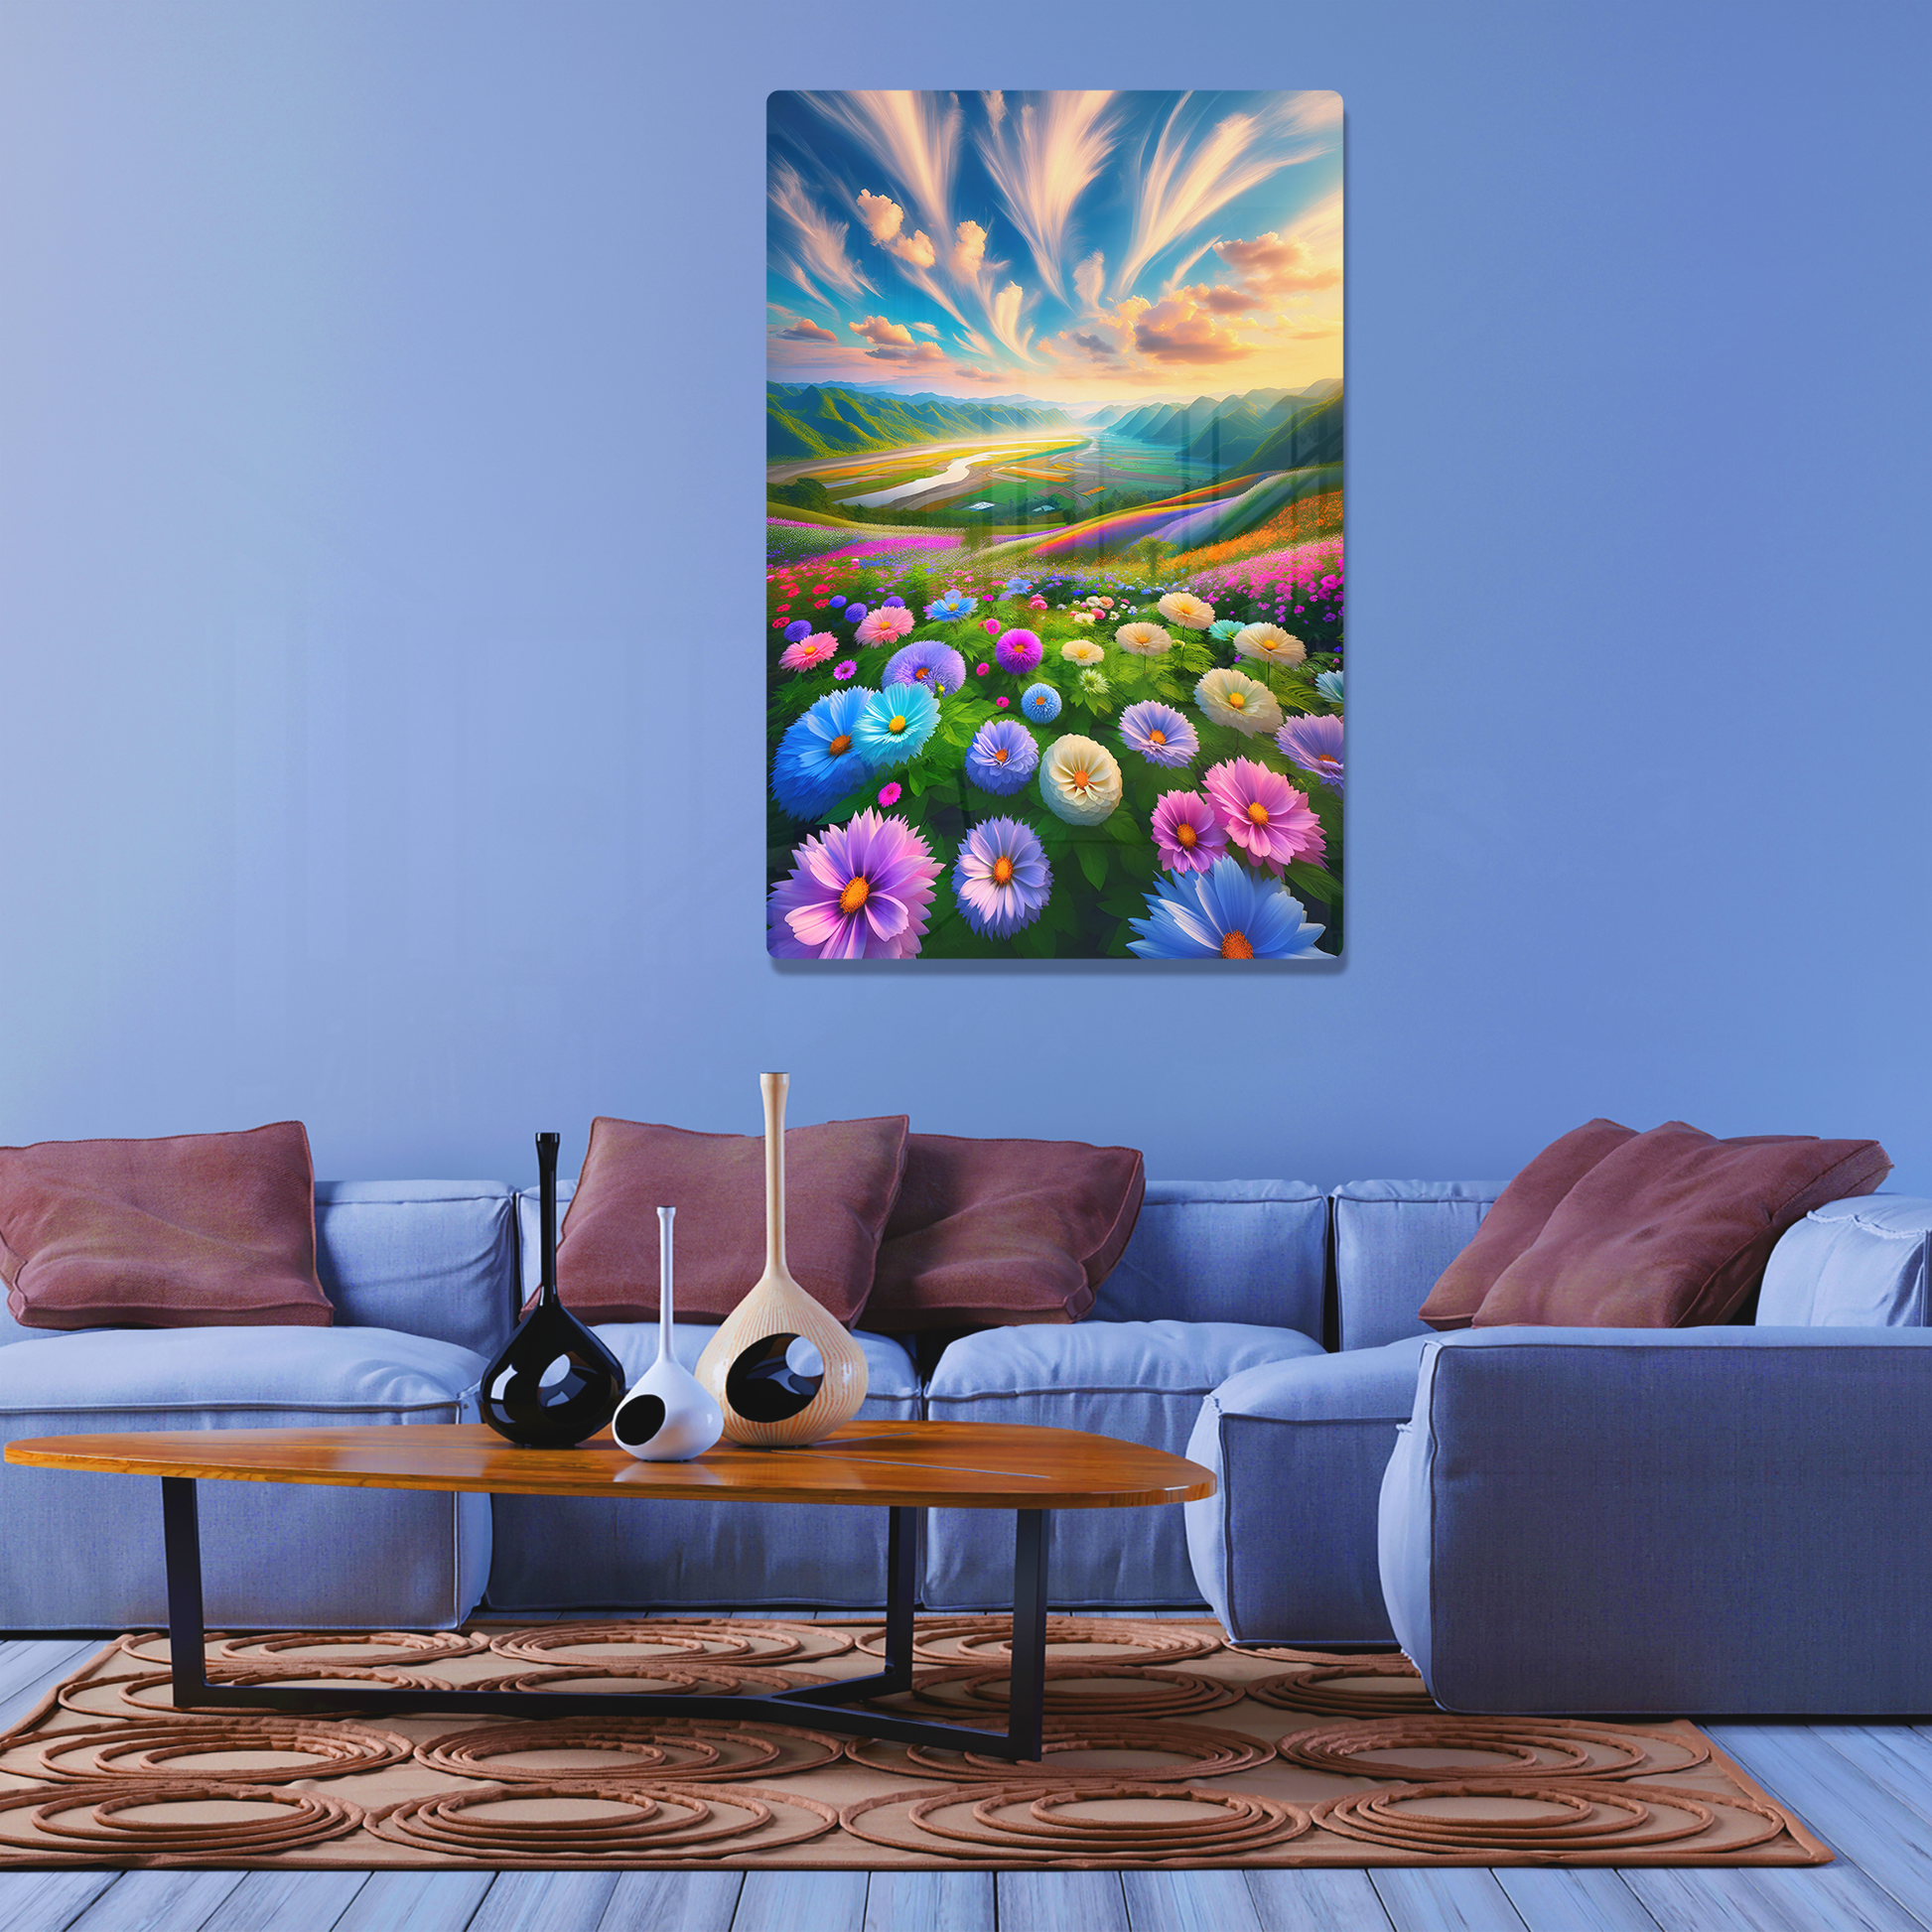 Blossom Valley Vista (Acrylic)Make a design statement with Blossom Valley Vista acrylic prints from RimaGallery. The sleek 1⁄4" acrylic material creates a glass-like illusion for your wall art. PRimaGallery